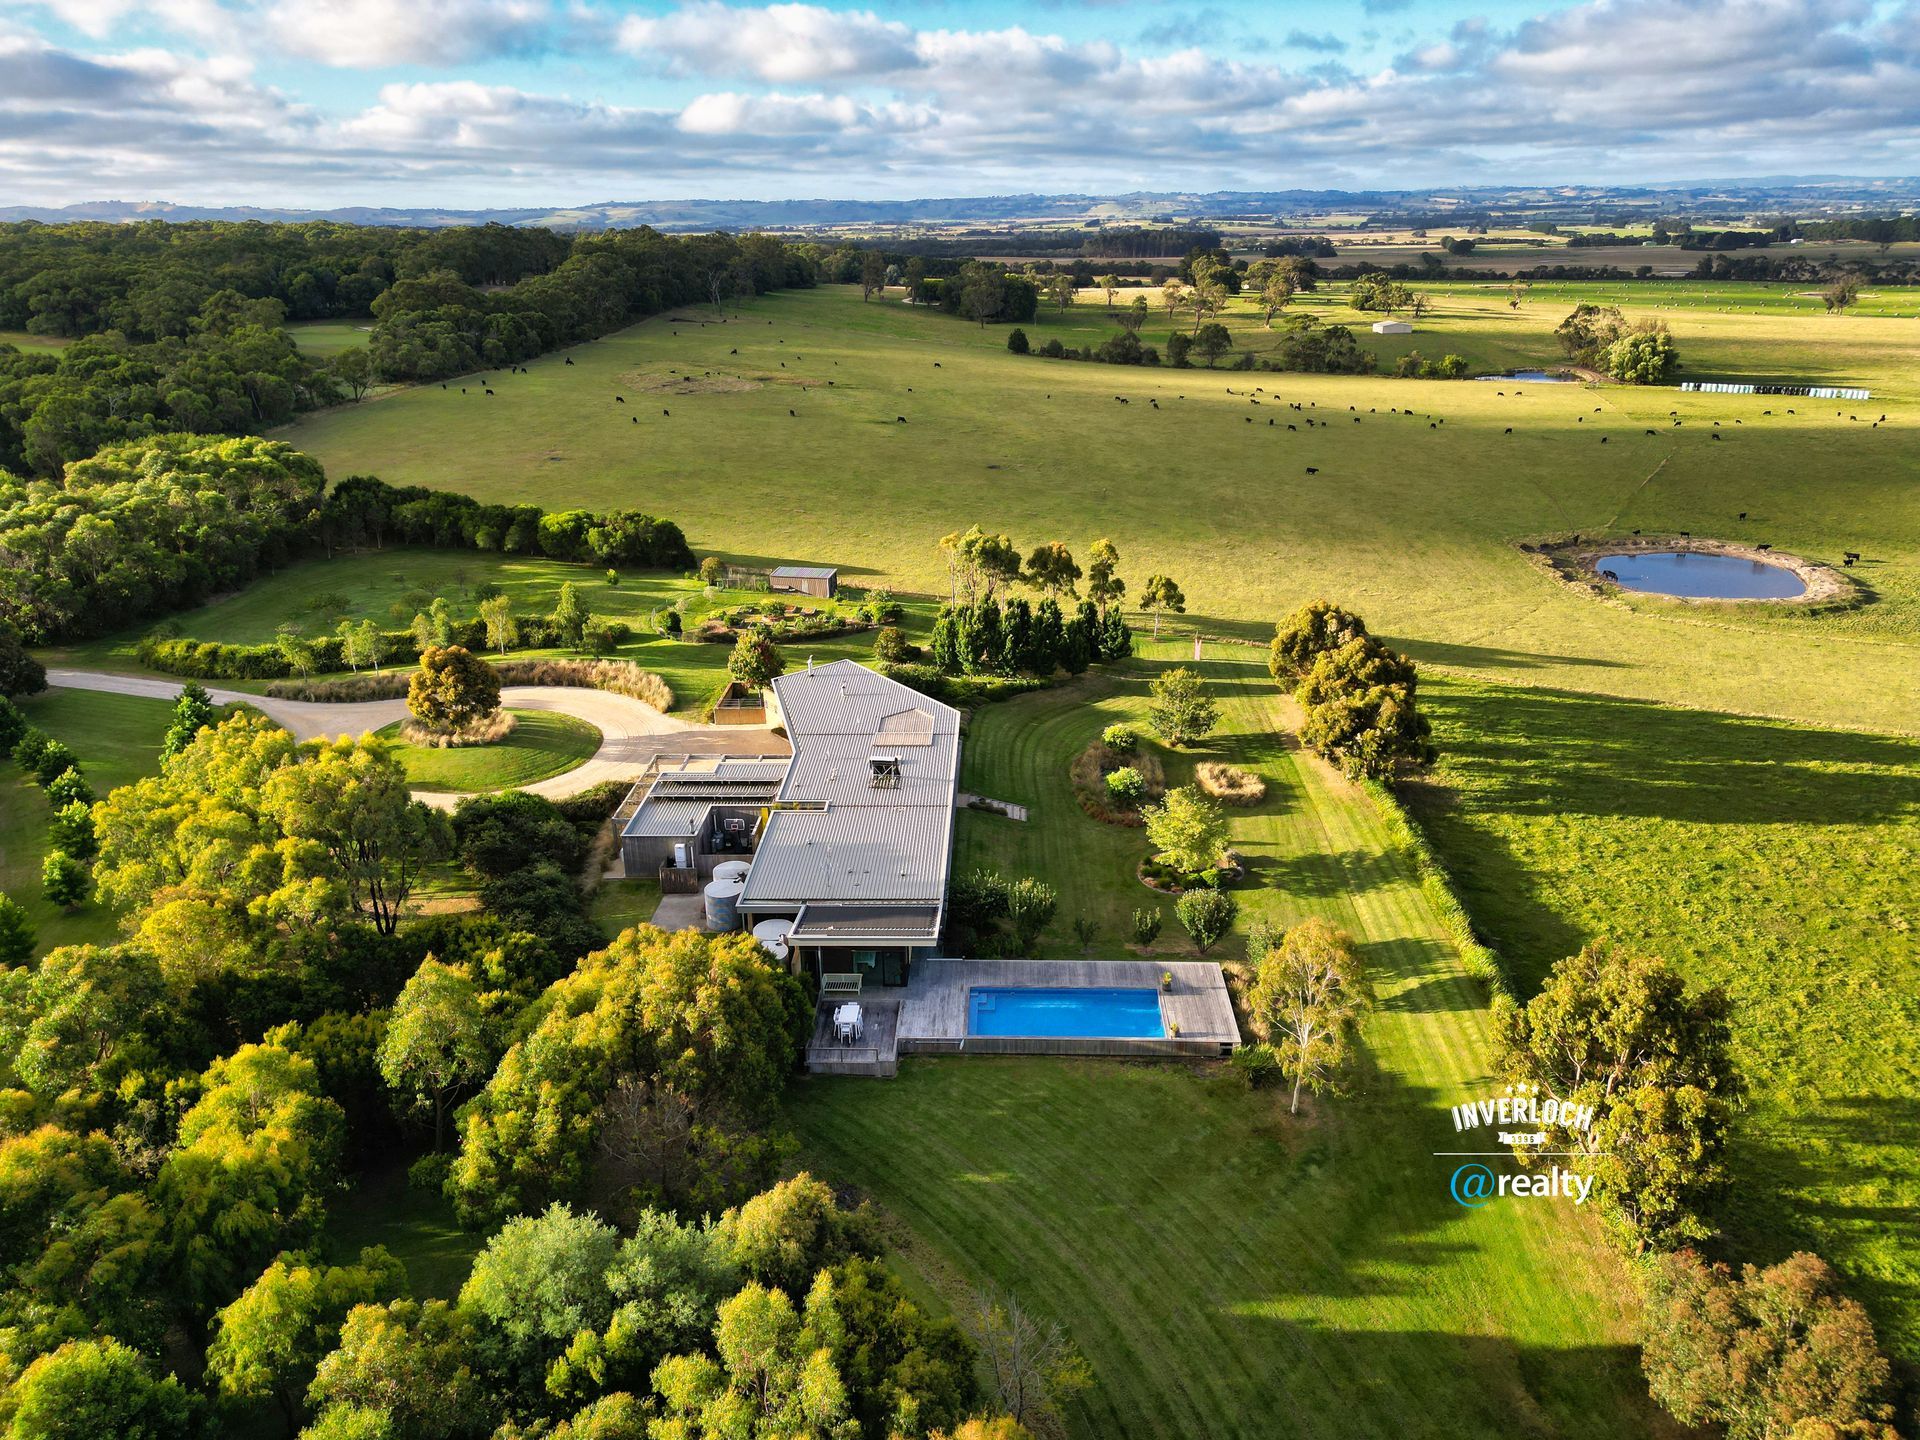 an aerial view of a house with a pool in the middle of a field surrounded by trees .